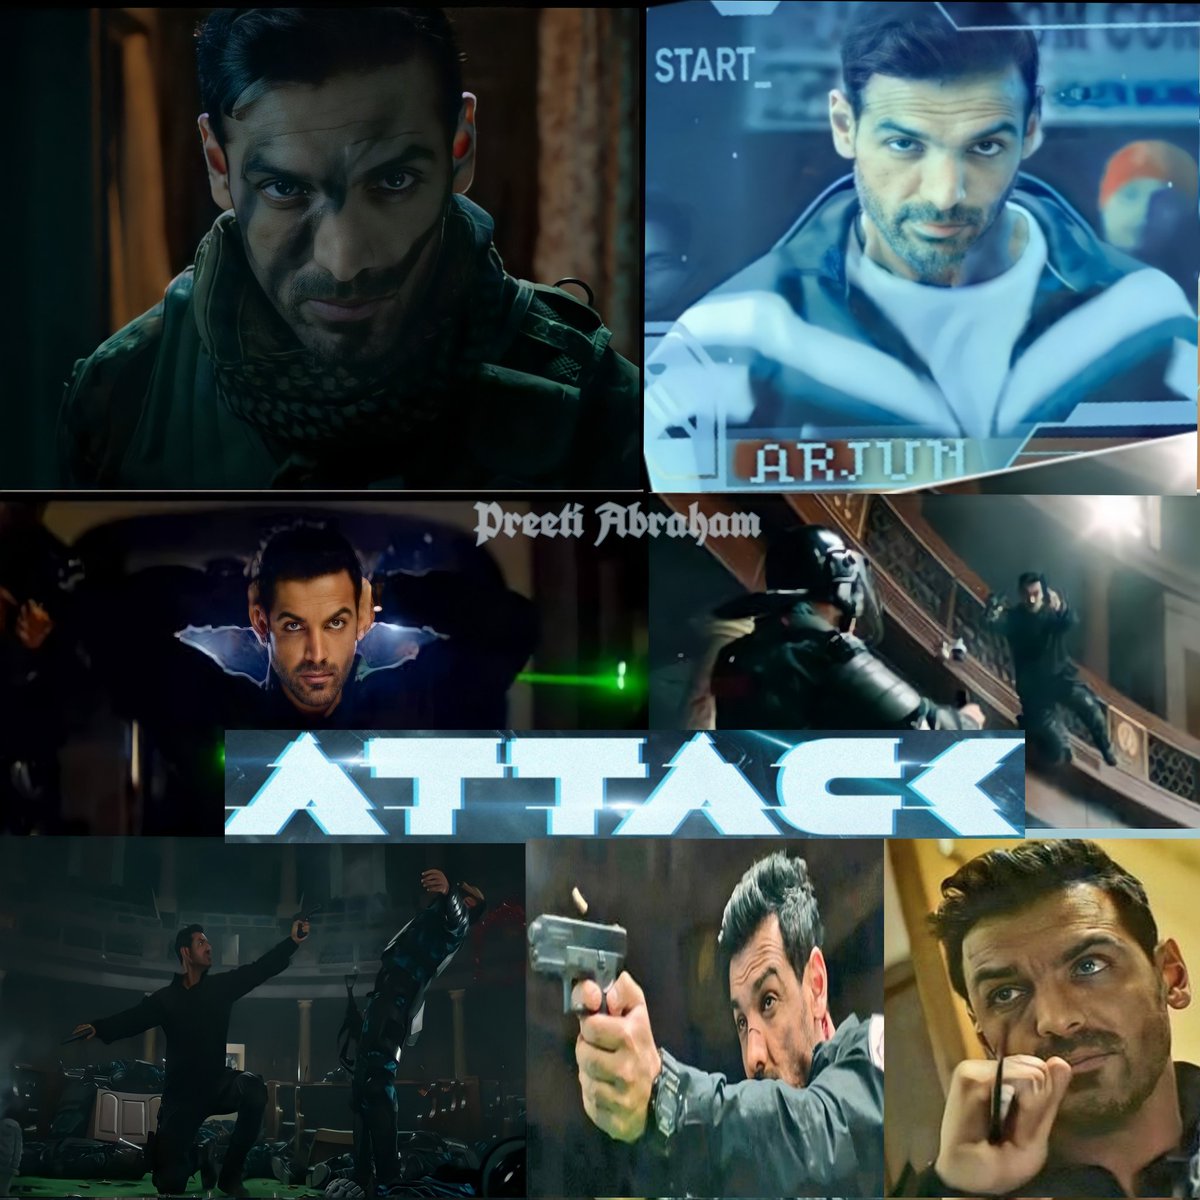 John Abraham Action+ Powerful BGM + Lakshyaraj Anand Direction what a  bang on #ATTACKtrailer this movie is gonna be epic experience in bollywood.

ATTACK will be a ever seen CYBORG SCI FI action movie in Indian Cinemas @TheJohnAbraham the first Indian super hero is damn terrific